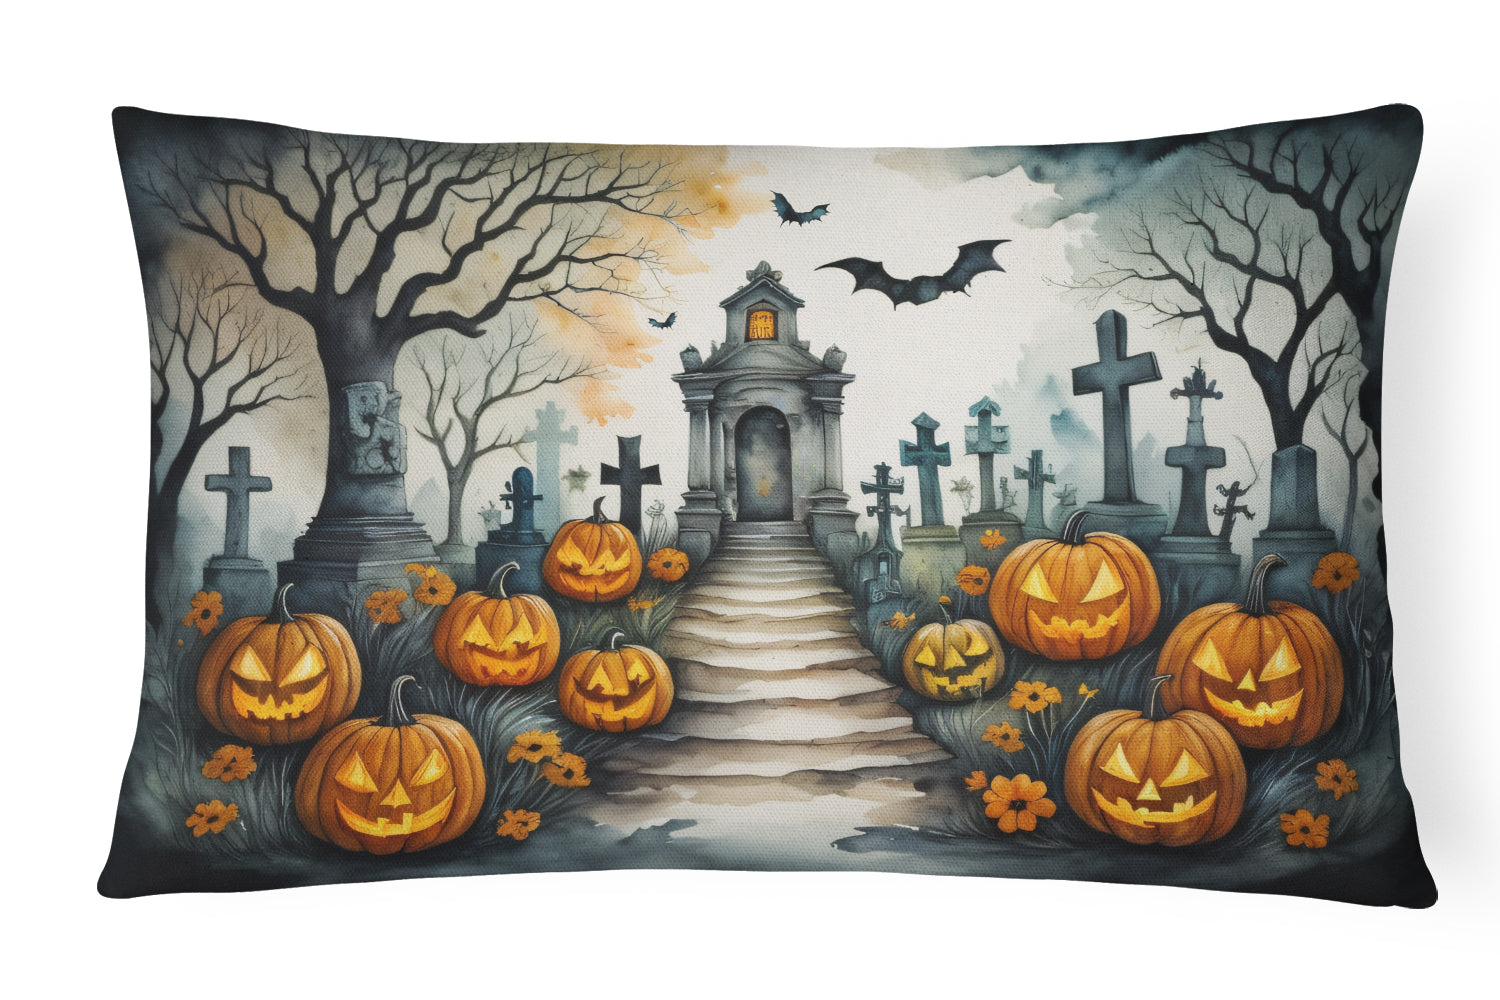 Buy this Marigold Spooky Halloween Fabric Decorative Pillow